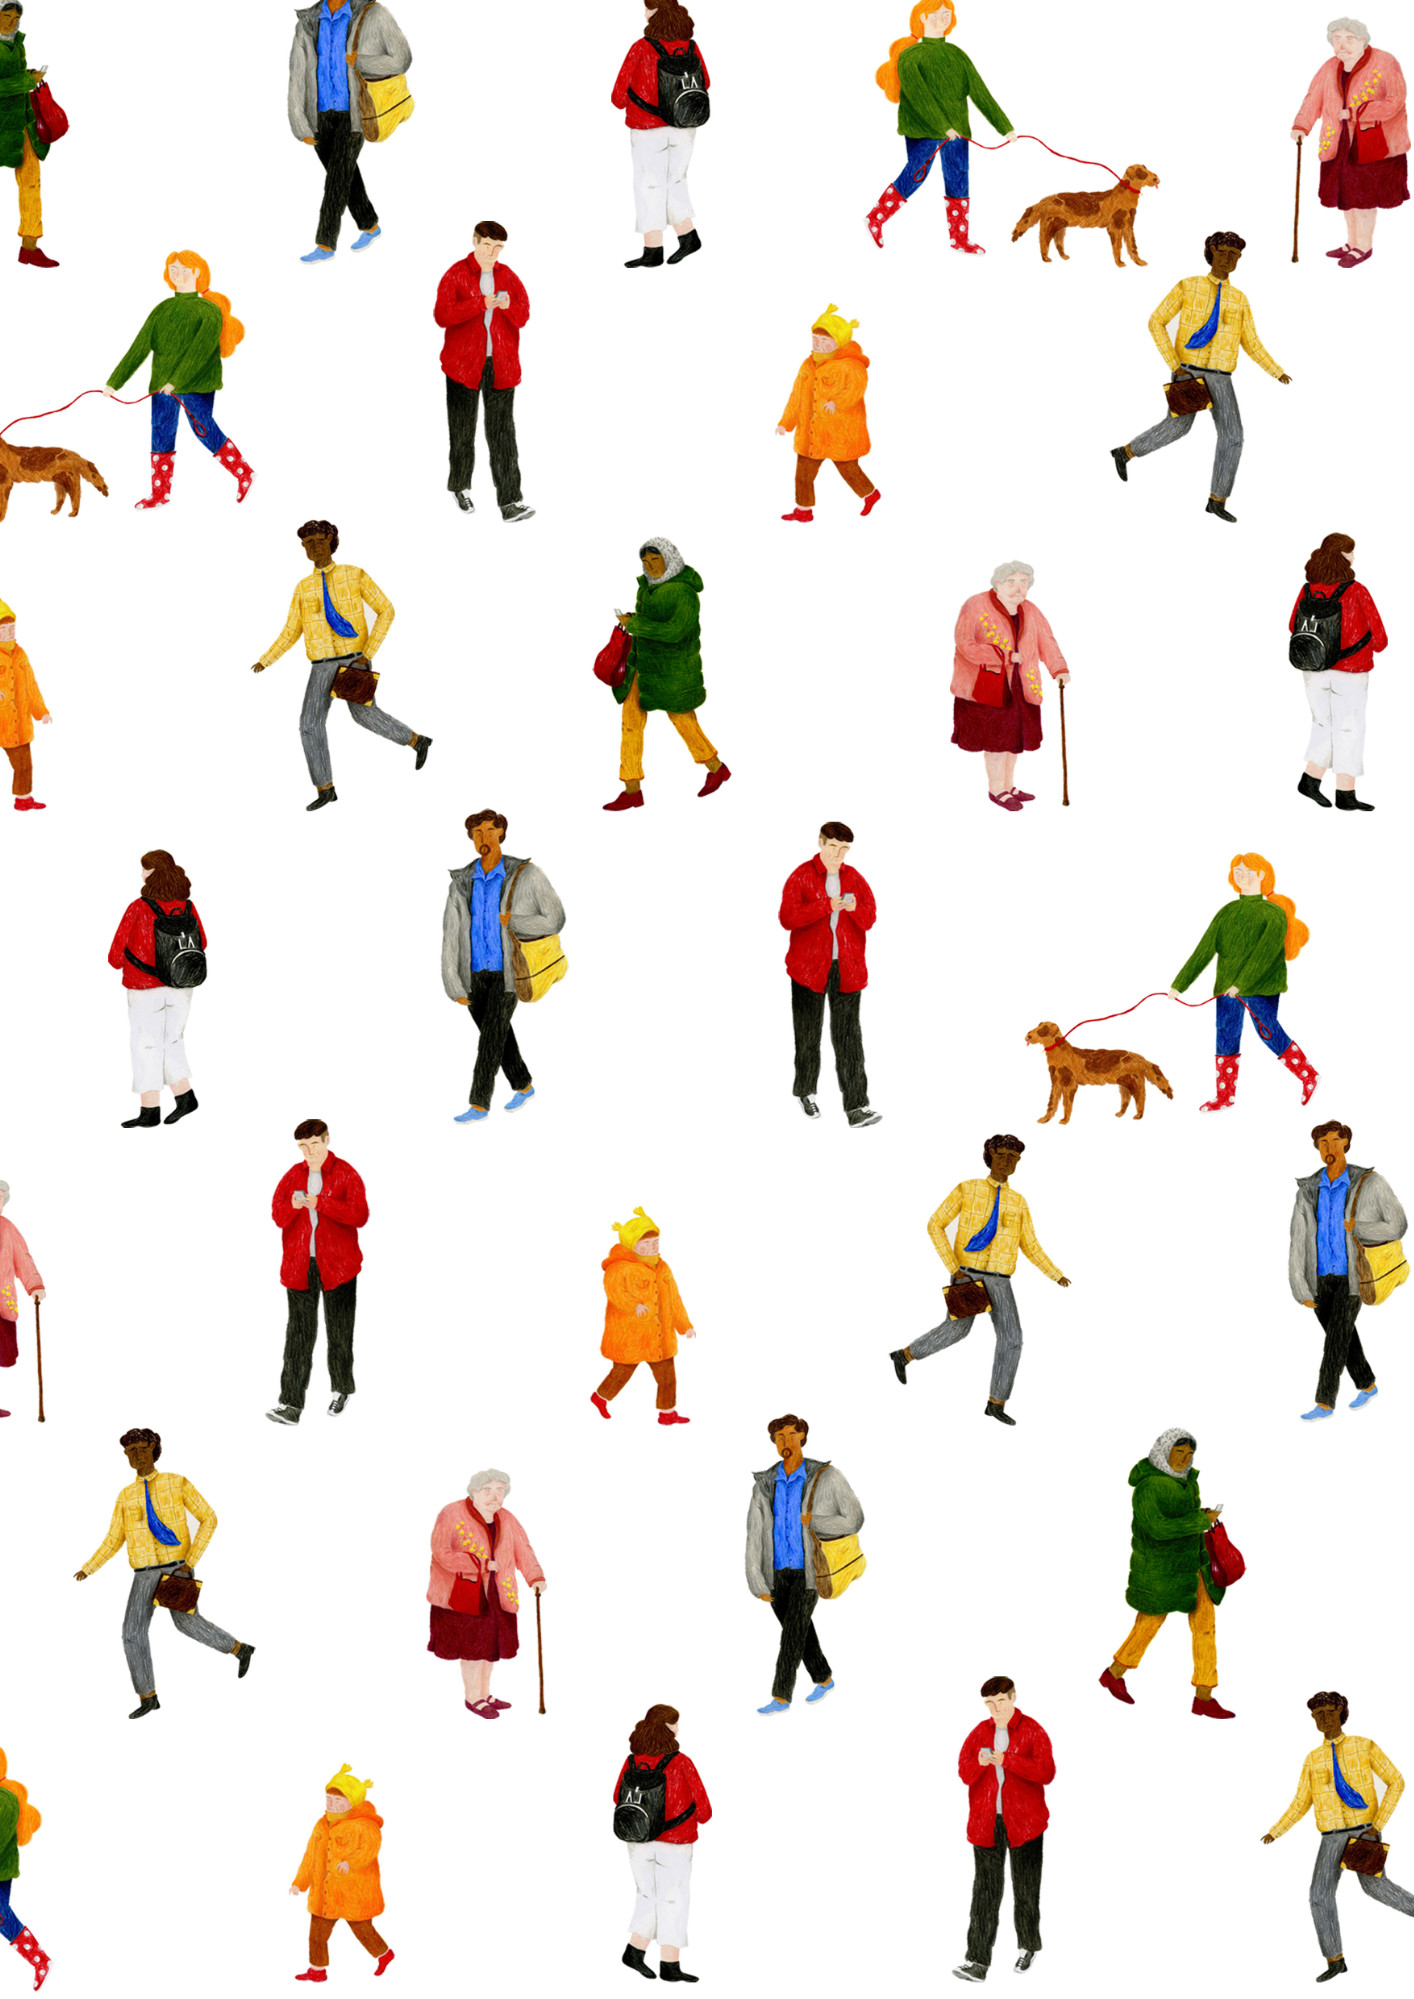 Pattern design of characters created from observational figure drawings in the streets of London. The characters celebrate diversity in society today through the texture and bright colours. Kayleigh Keen.